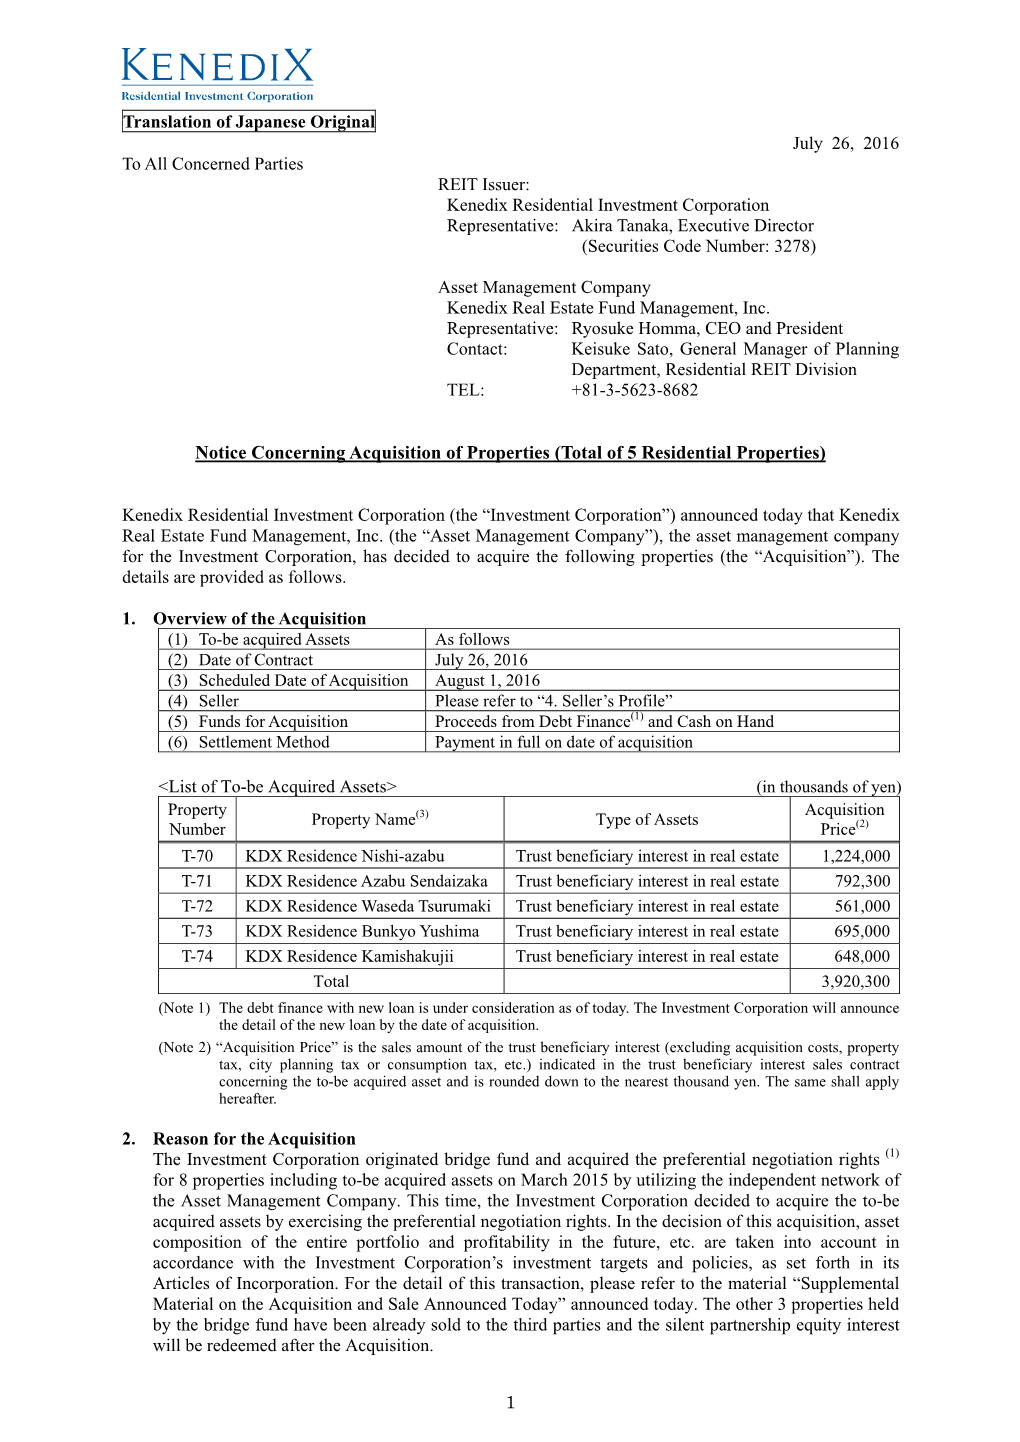 Notice Concerning Acquisition of Properties (Total of 5 Residential Properties)